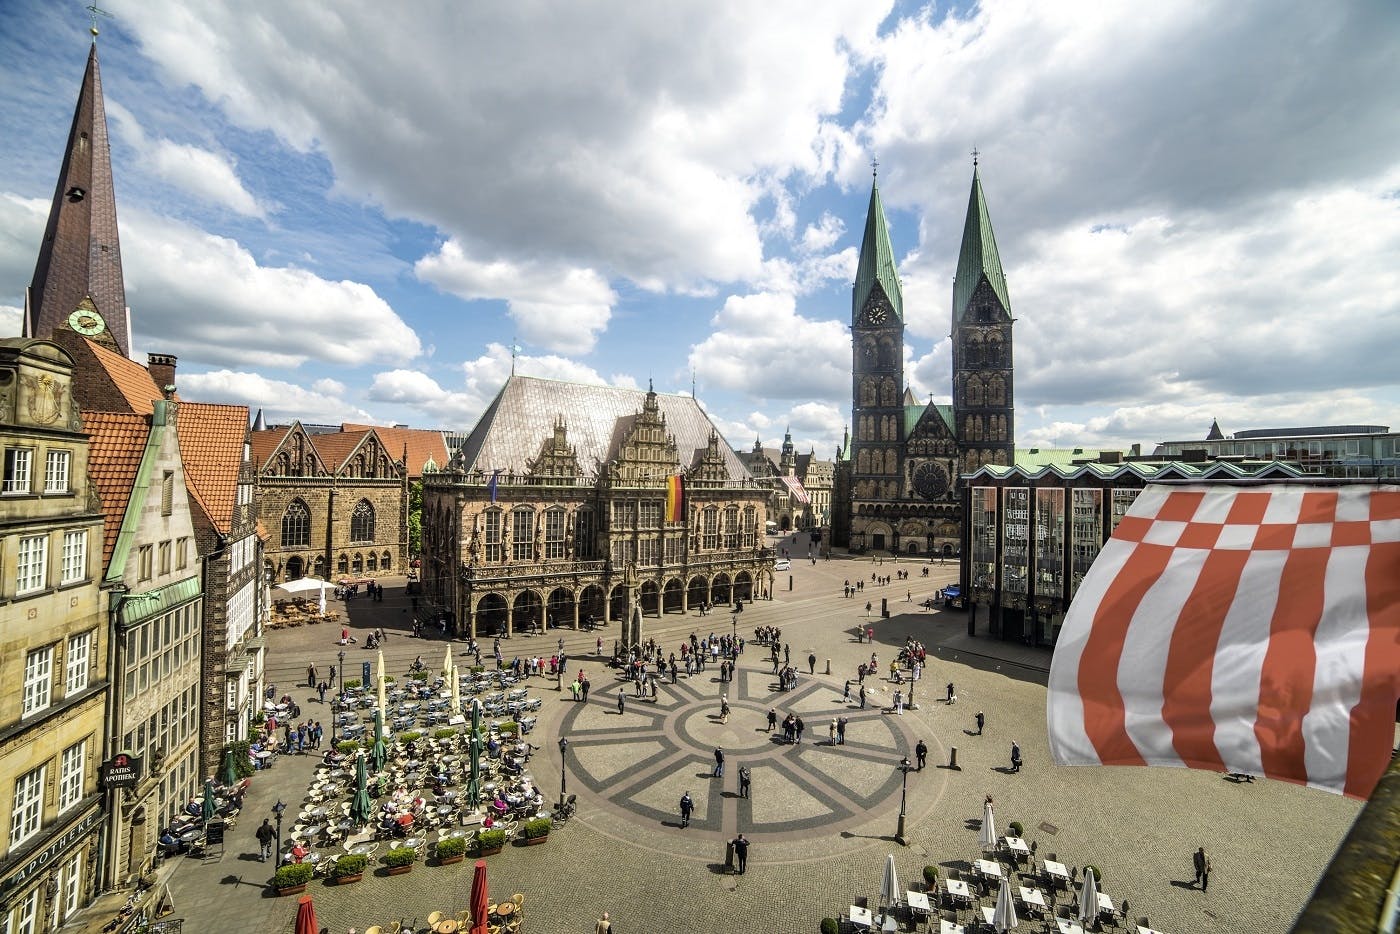 Guided tour of Bremen's Town Hall Musement